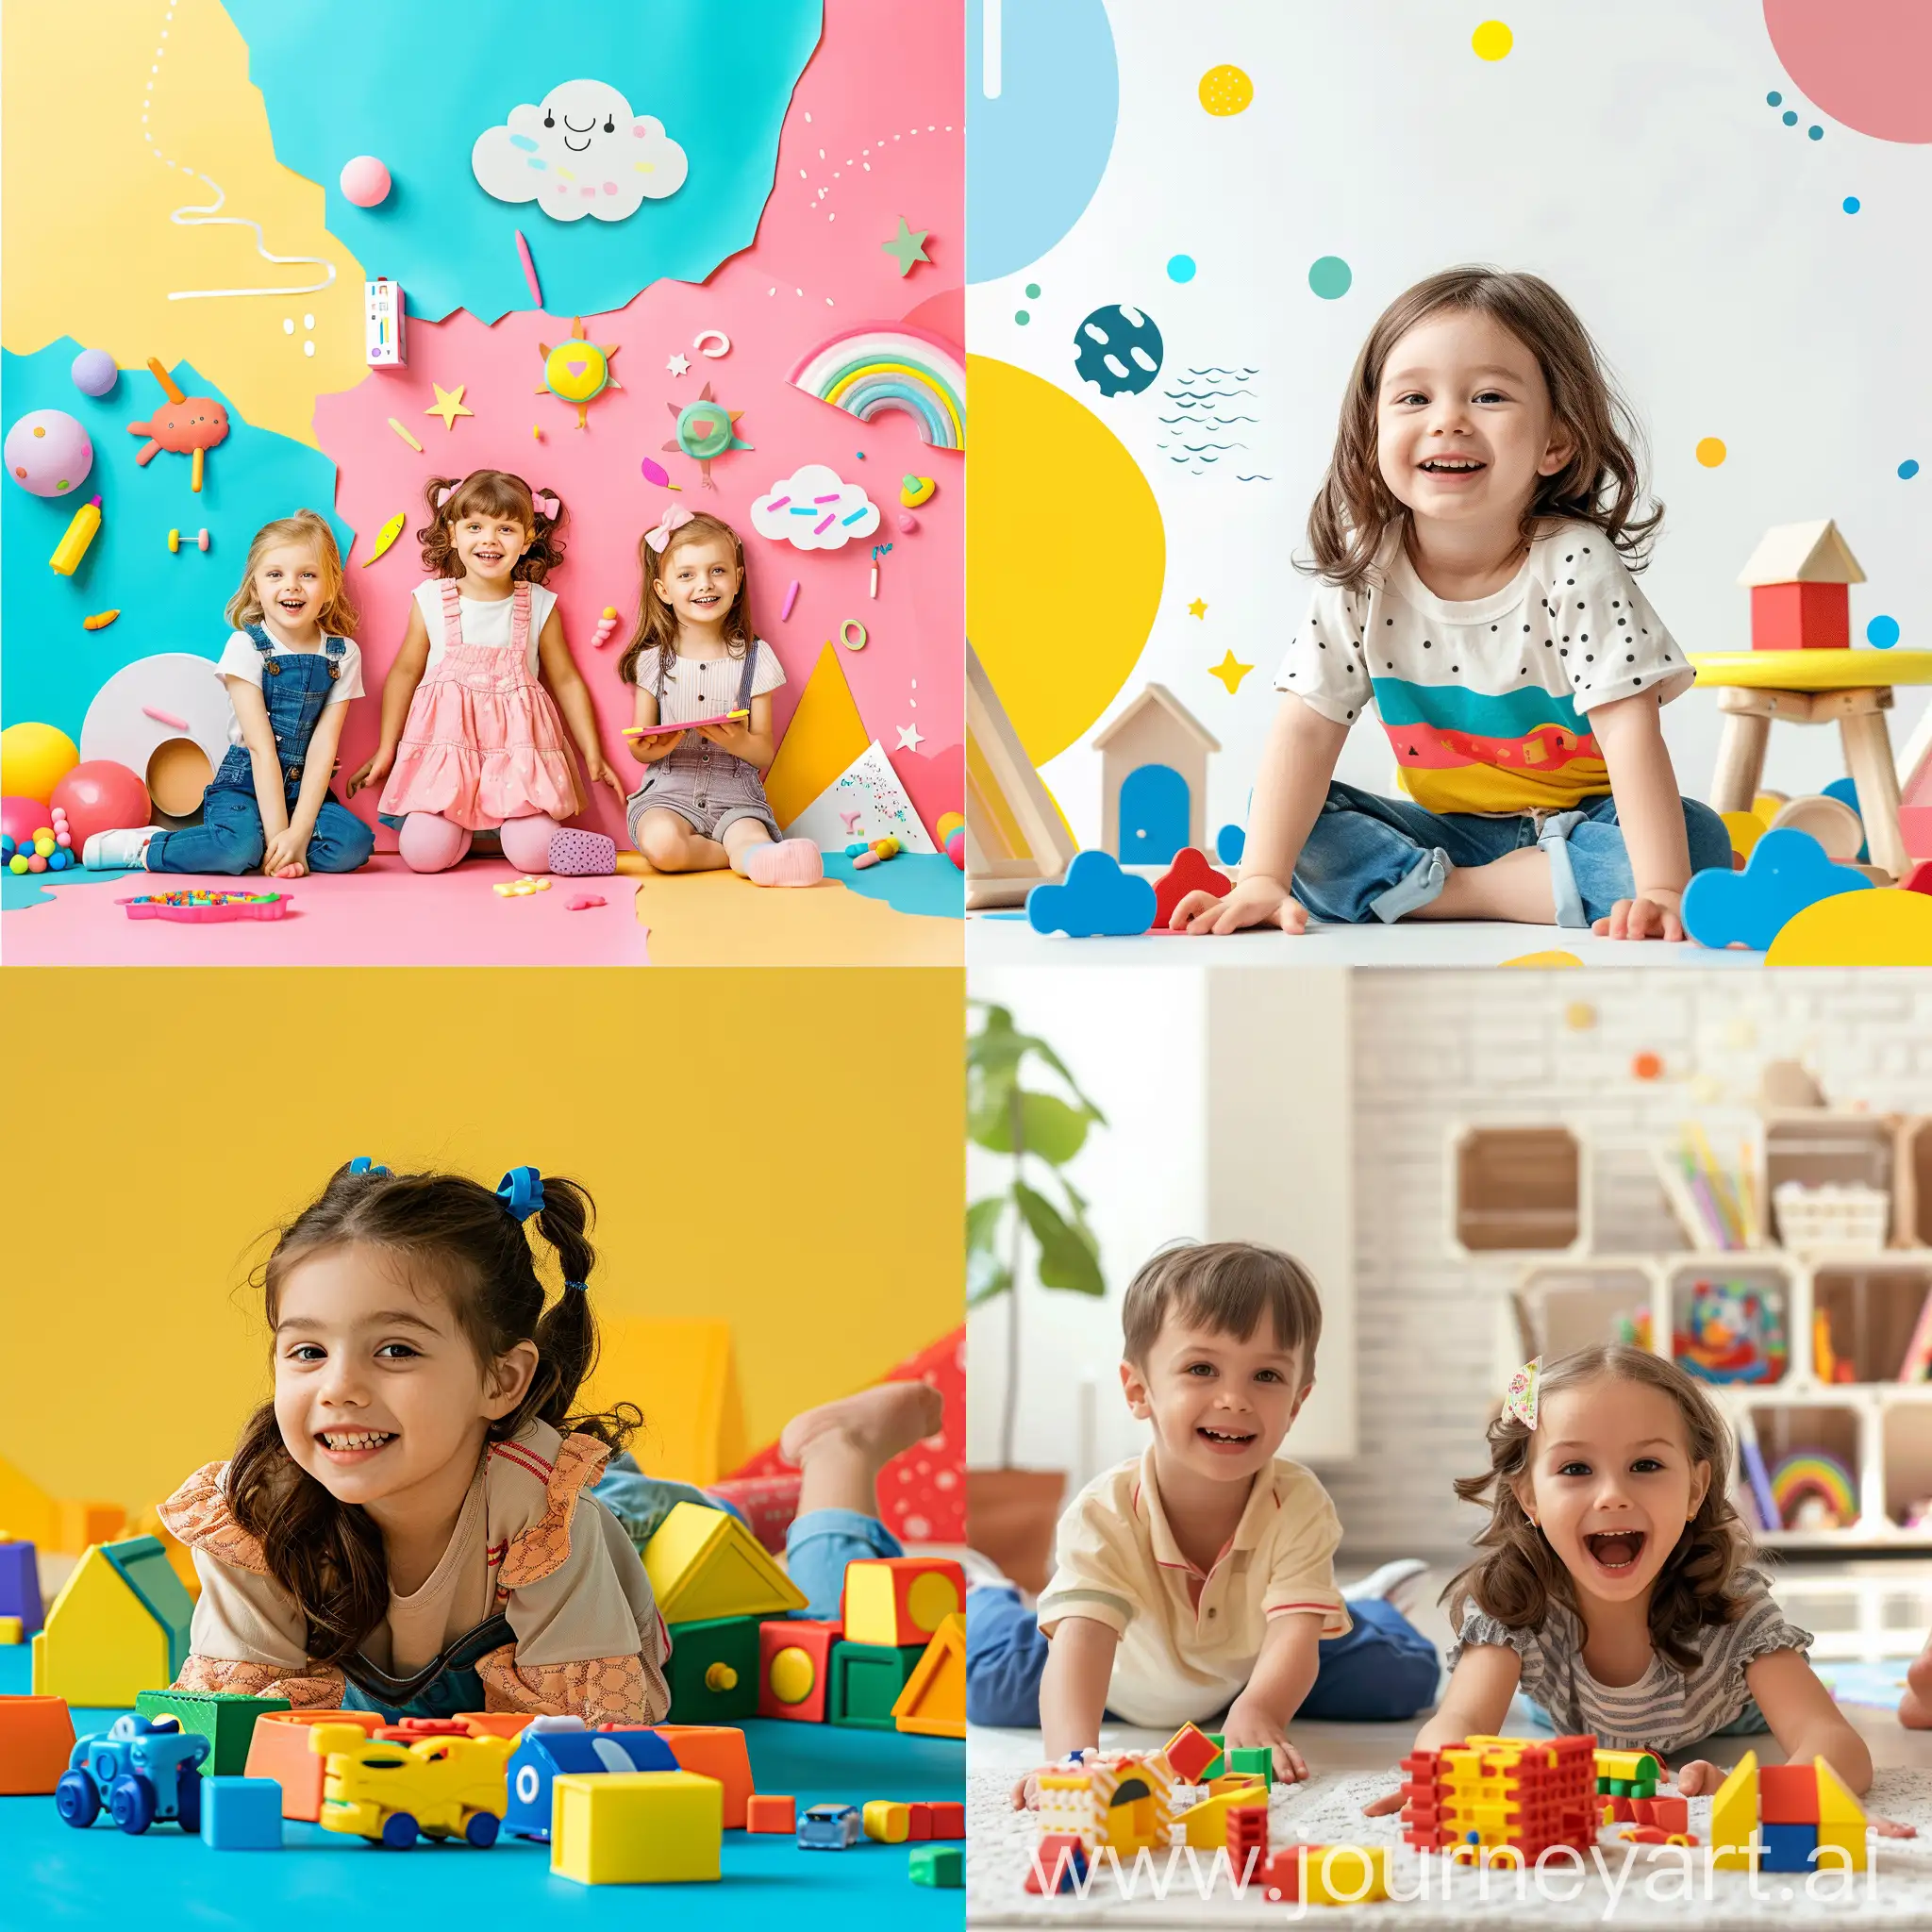 Vibrant-Childrens-Products-Banner-with-Playful-Designs